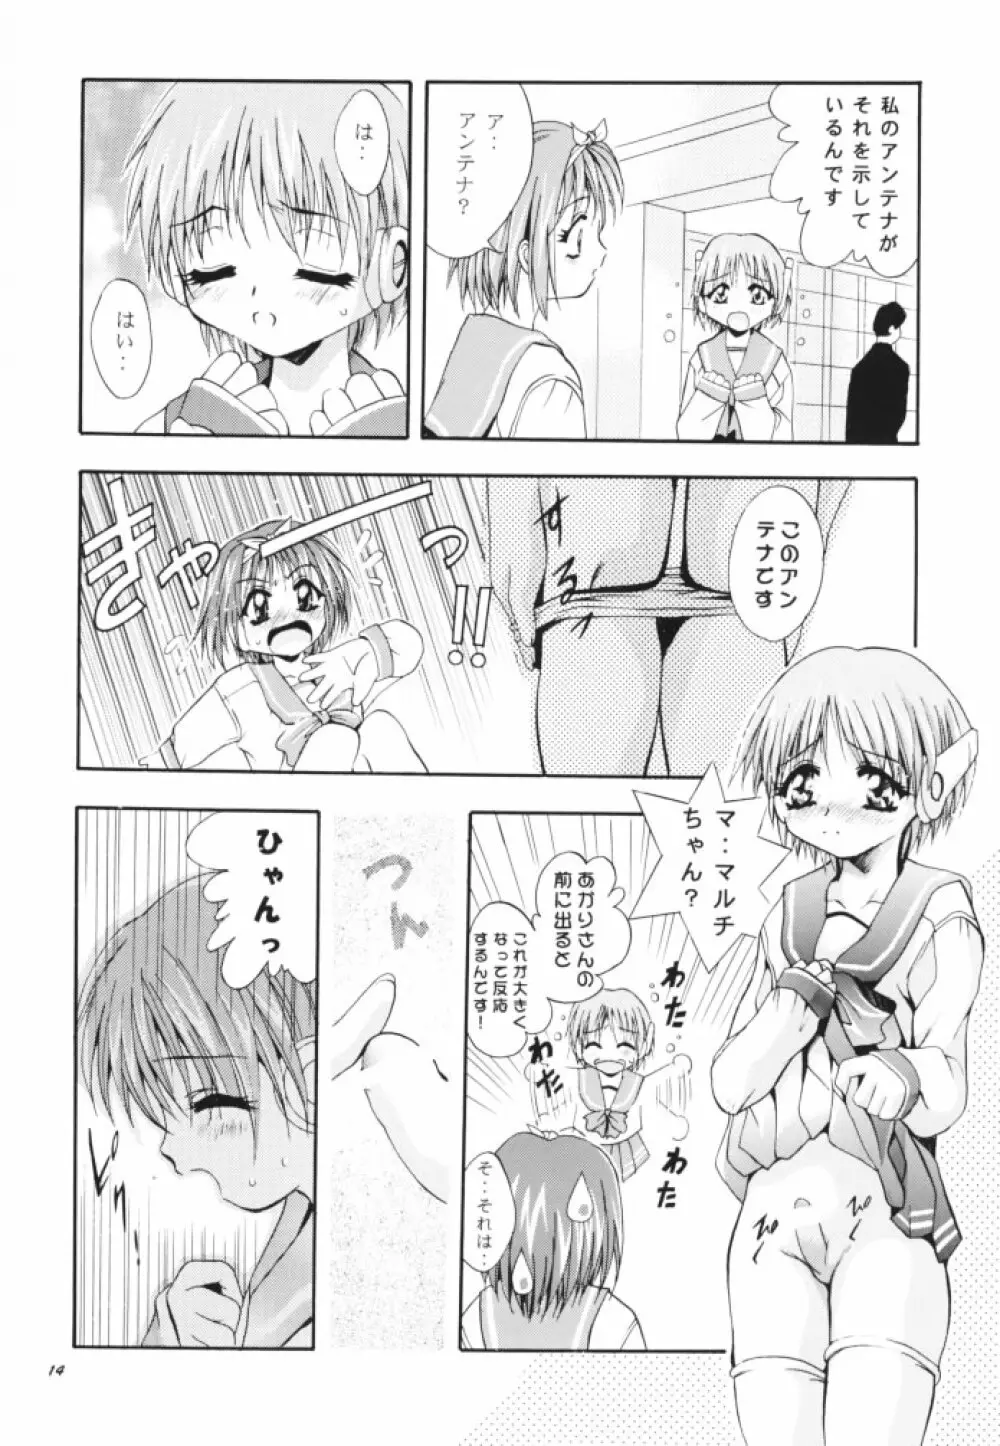 MOUSOU THEATER 11 13ページ